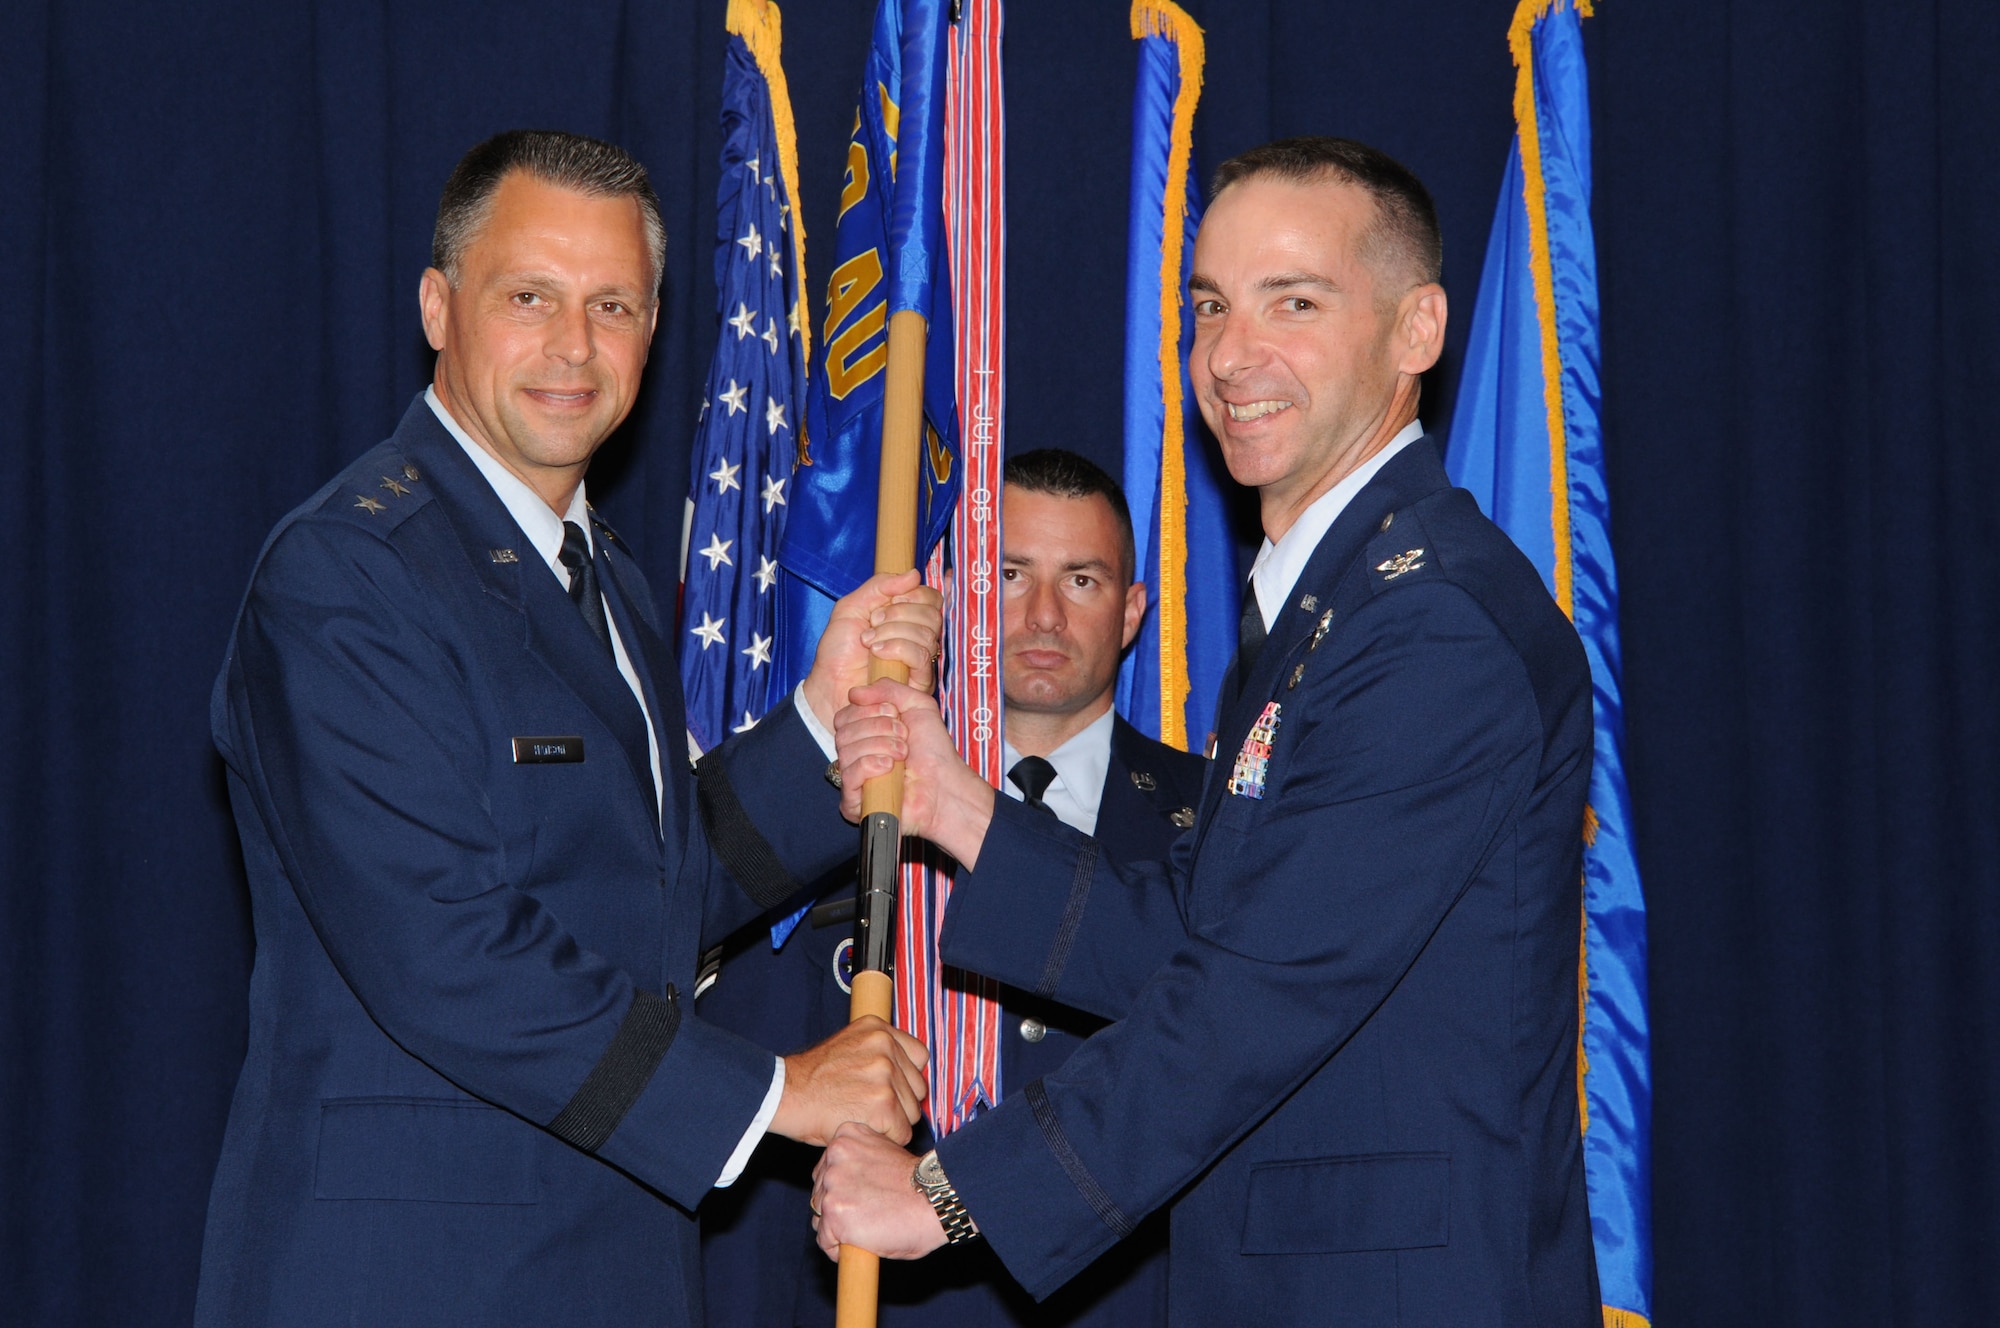 Maj. Gen. Scott Hanson passes the colors to Col. Mark Czelusta, incoming commander of the Squadron Officer College, during the change of command ceremony July 3 at Husband Auditorium. (Air Force photo by Bud Hancock)